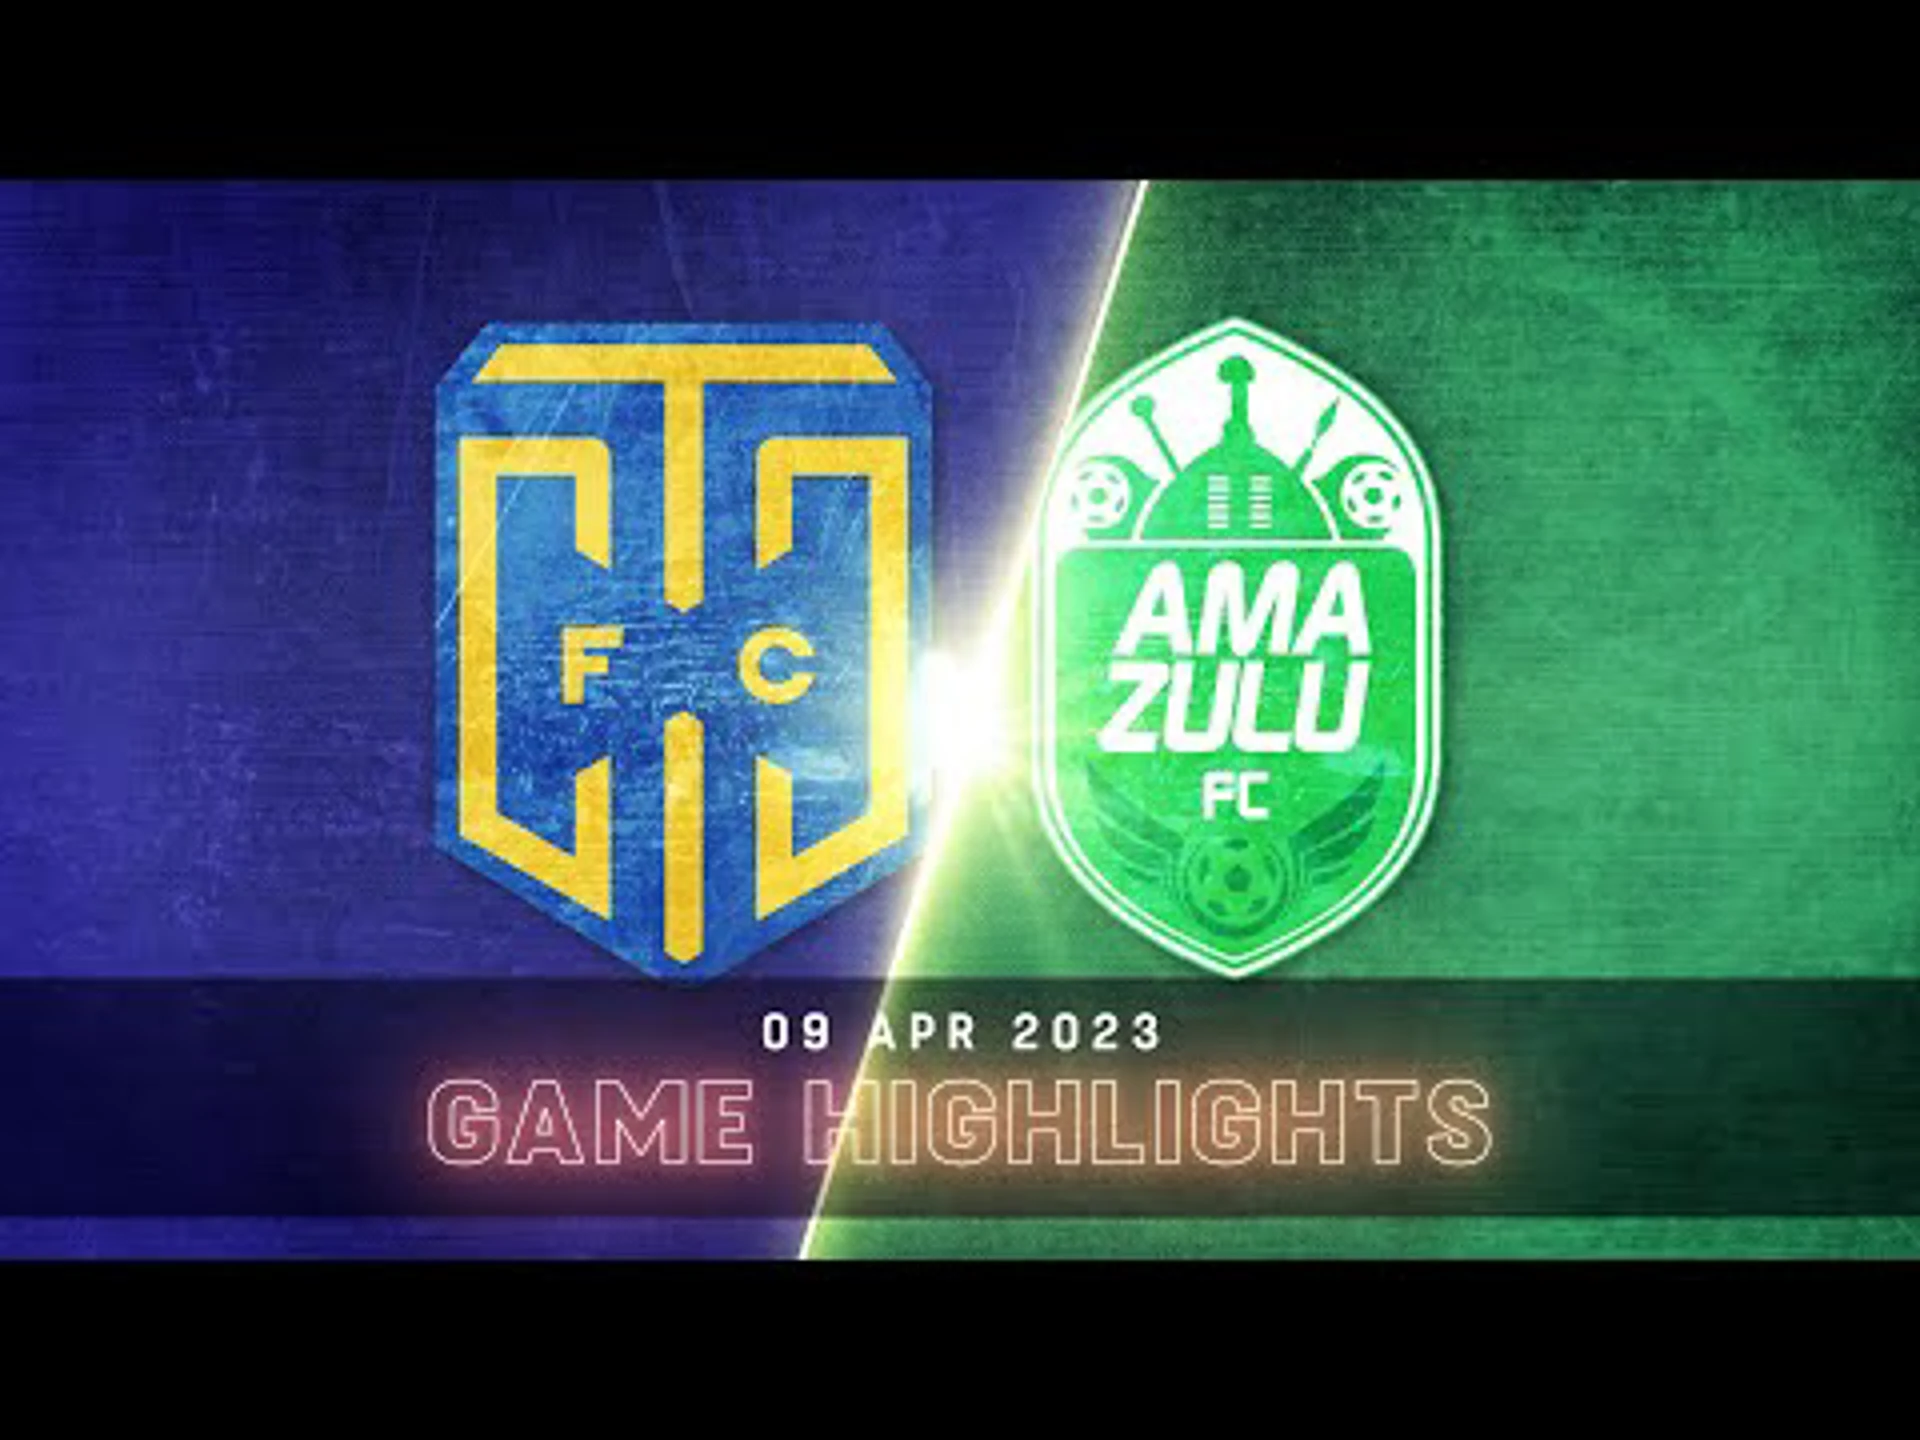 Cape Town City v AmaZulu | Match in 5 Minutes | DStv Premiership | Highlights